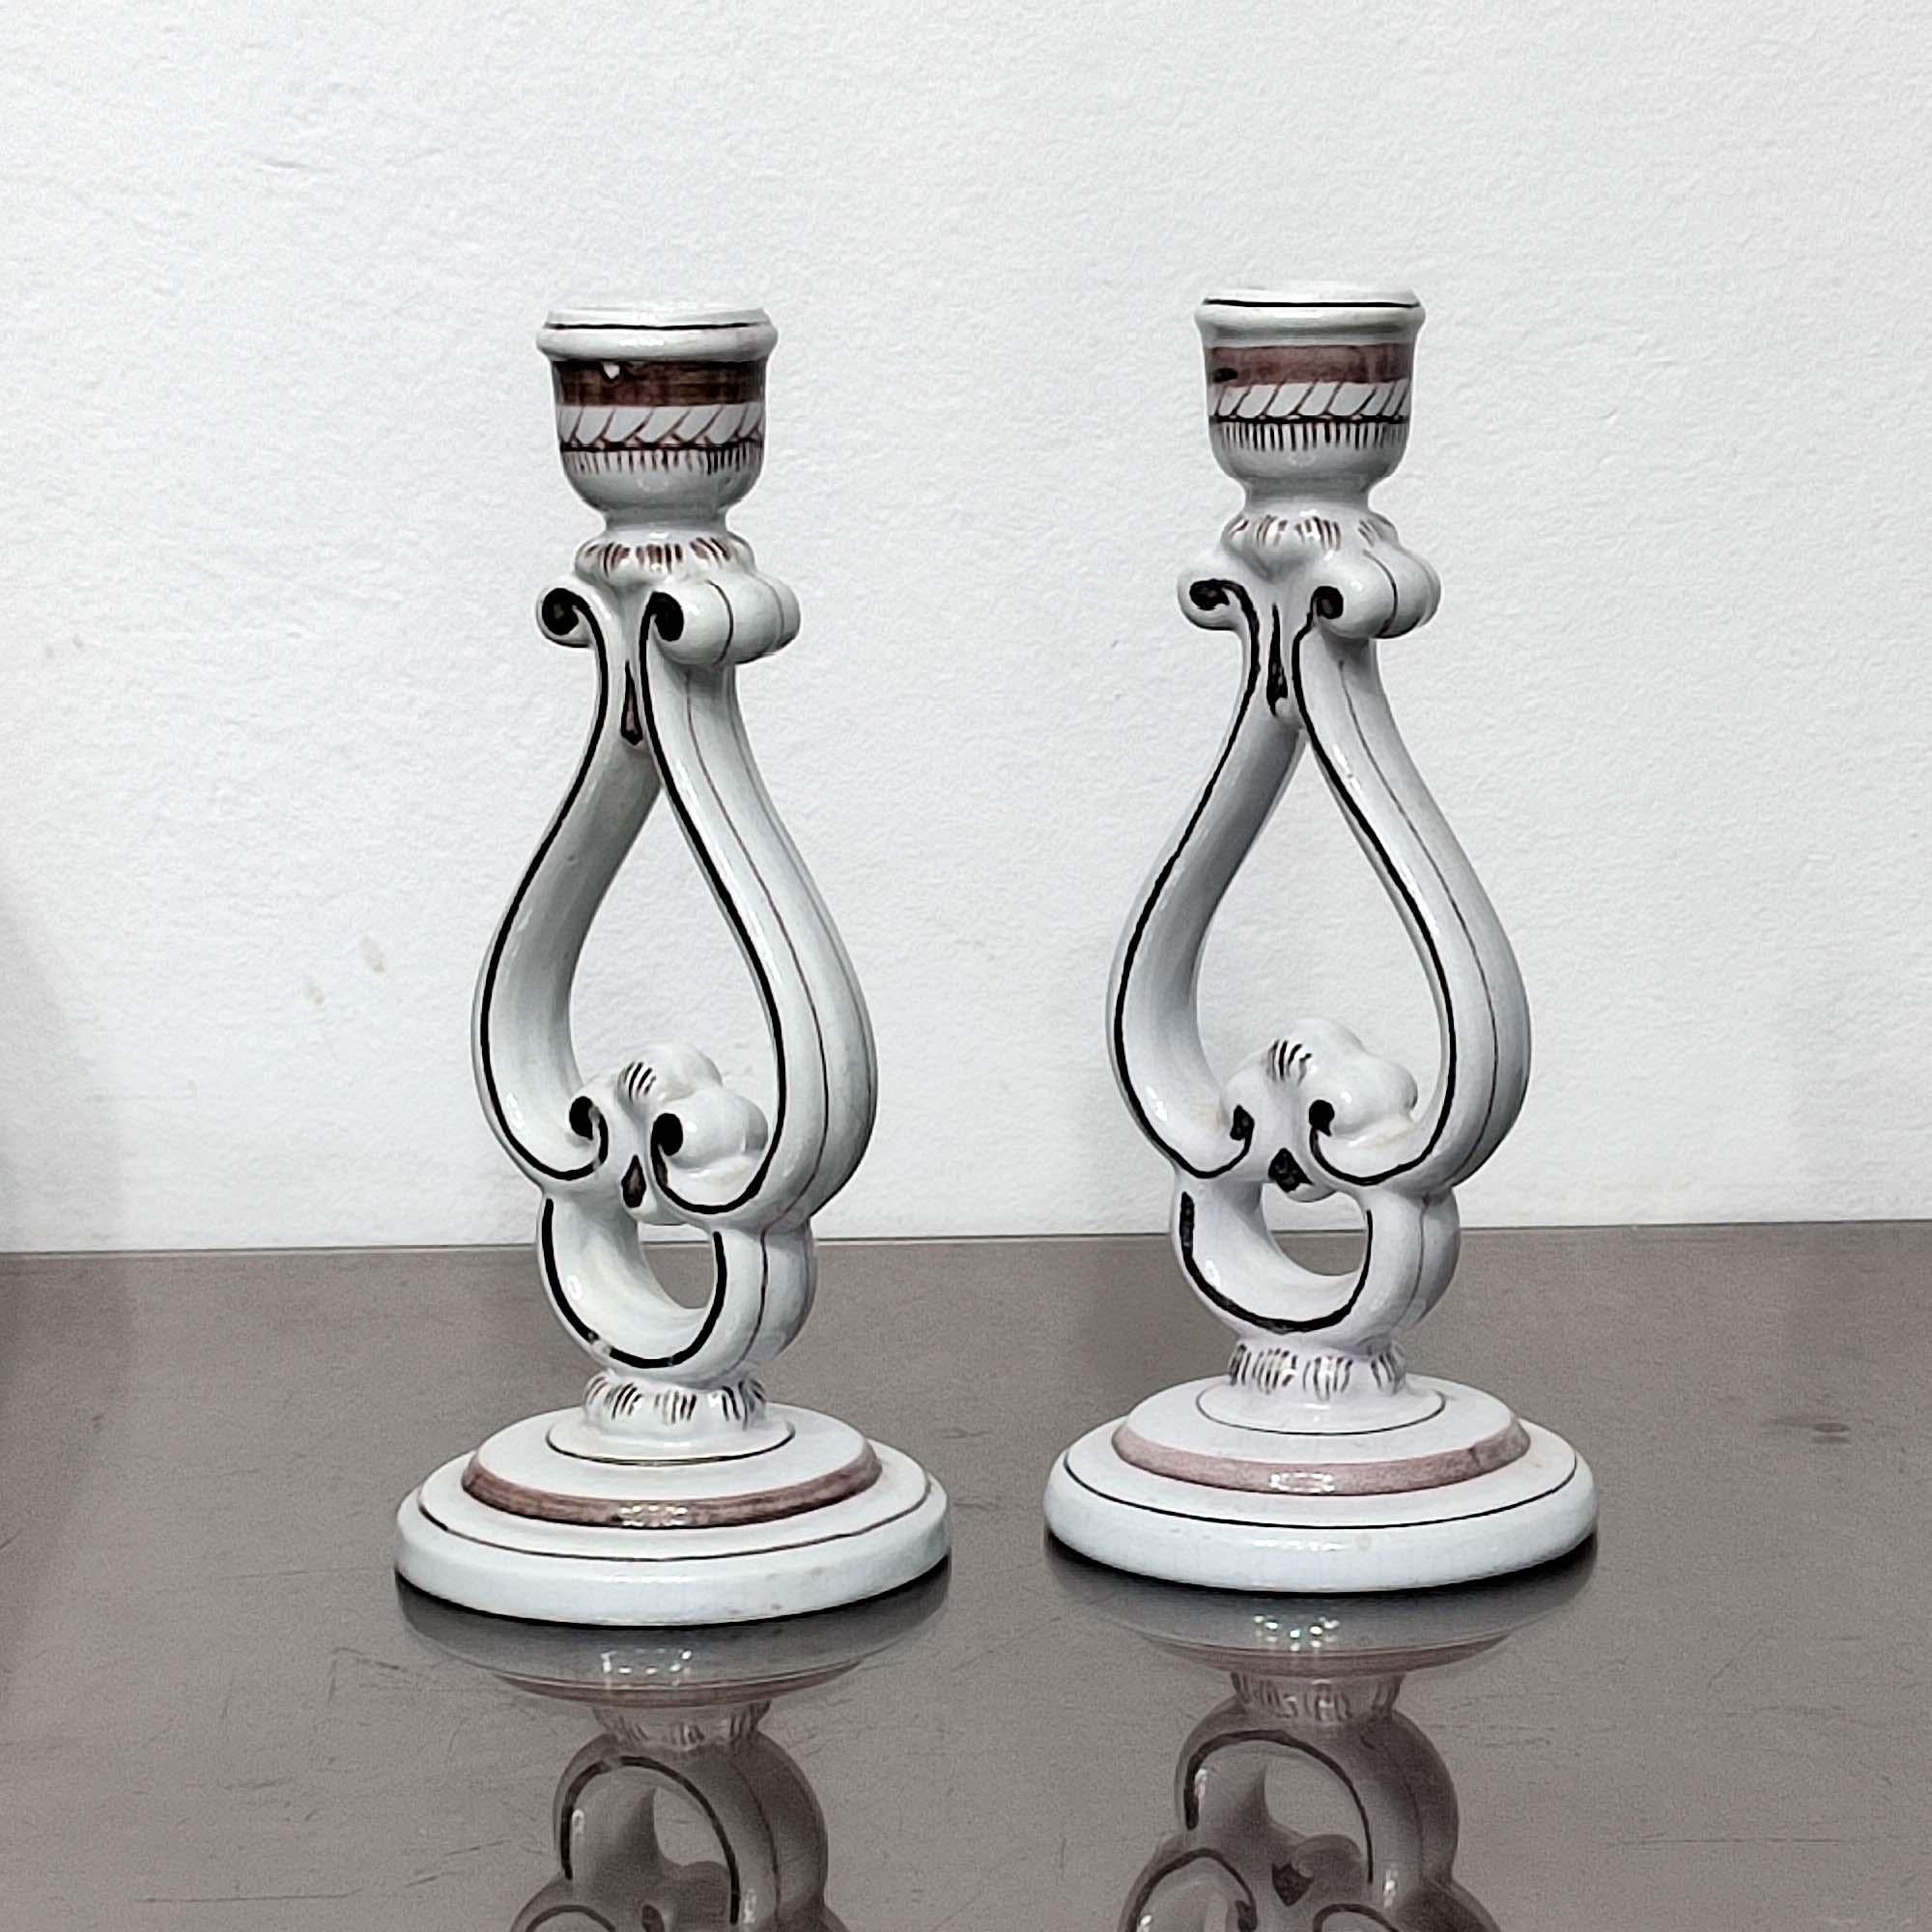 Early 20th Century Art Deco Ceramic Candleholders Designed by Arthur Percy for Gefle, Sweden, 1920s For Sale